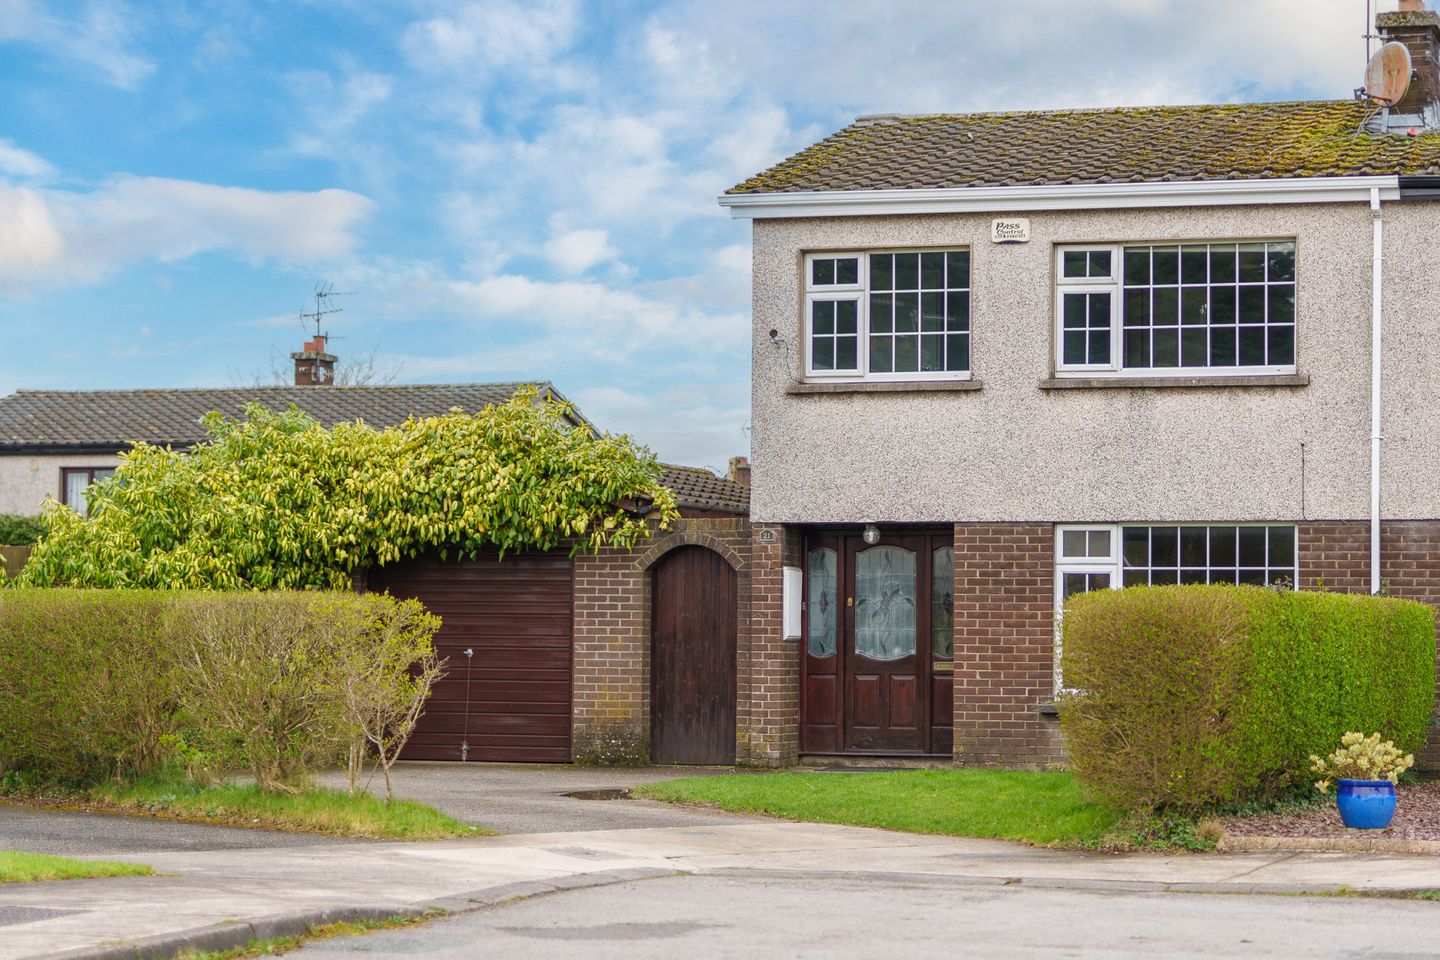 21 Oaklawns, Dundalk, Co. Louth, A91R9V2